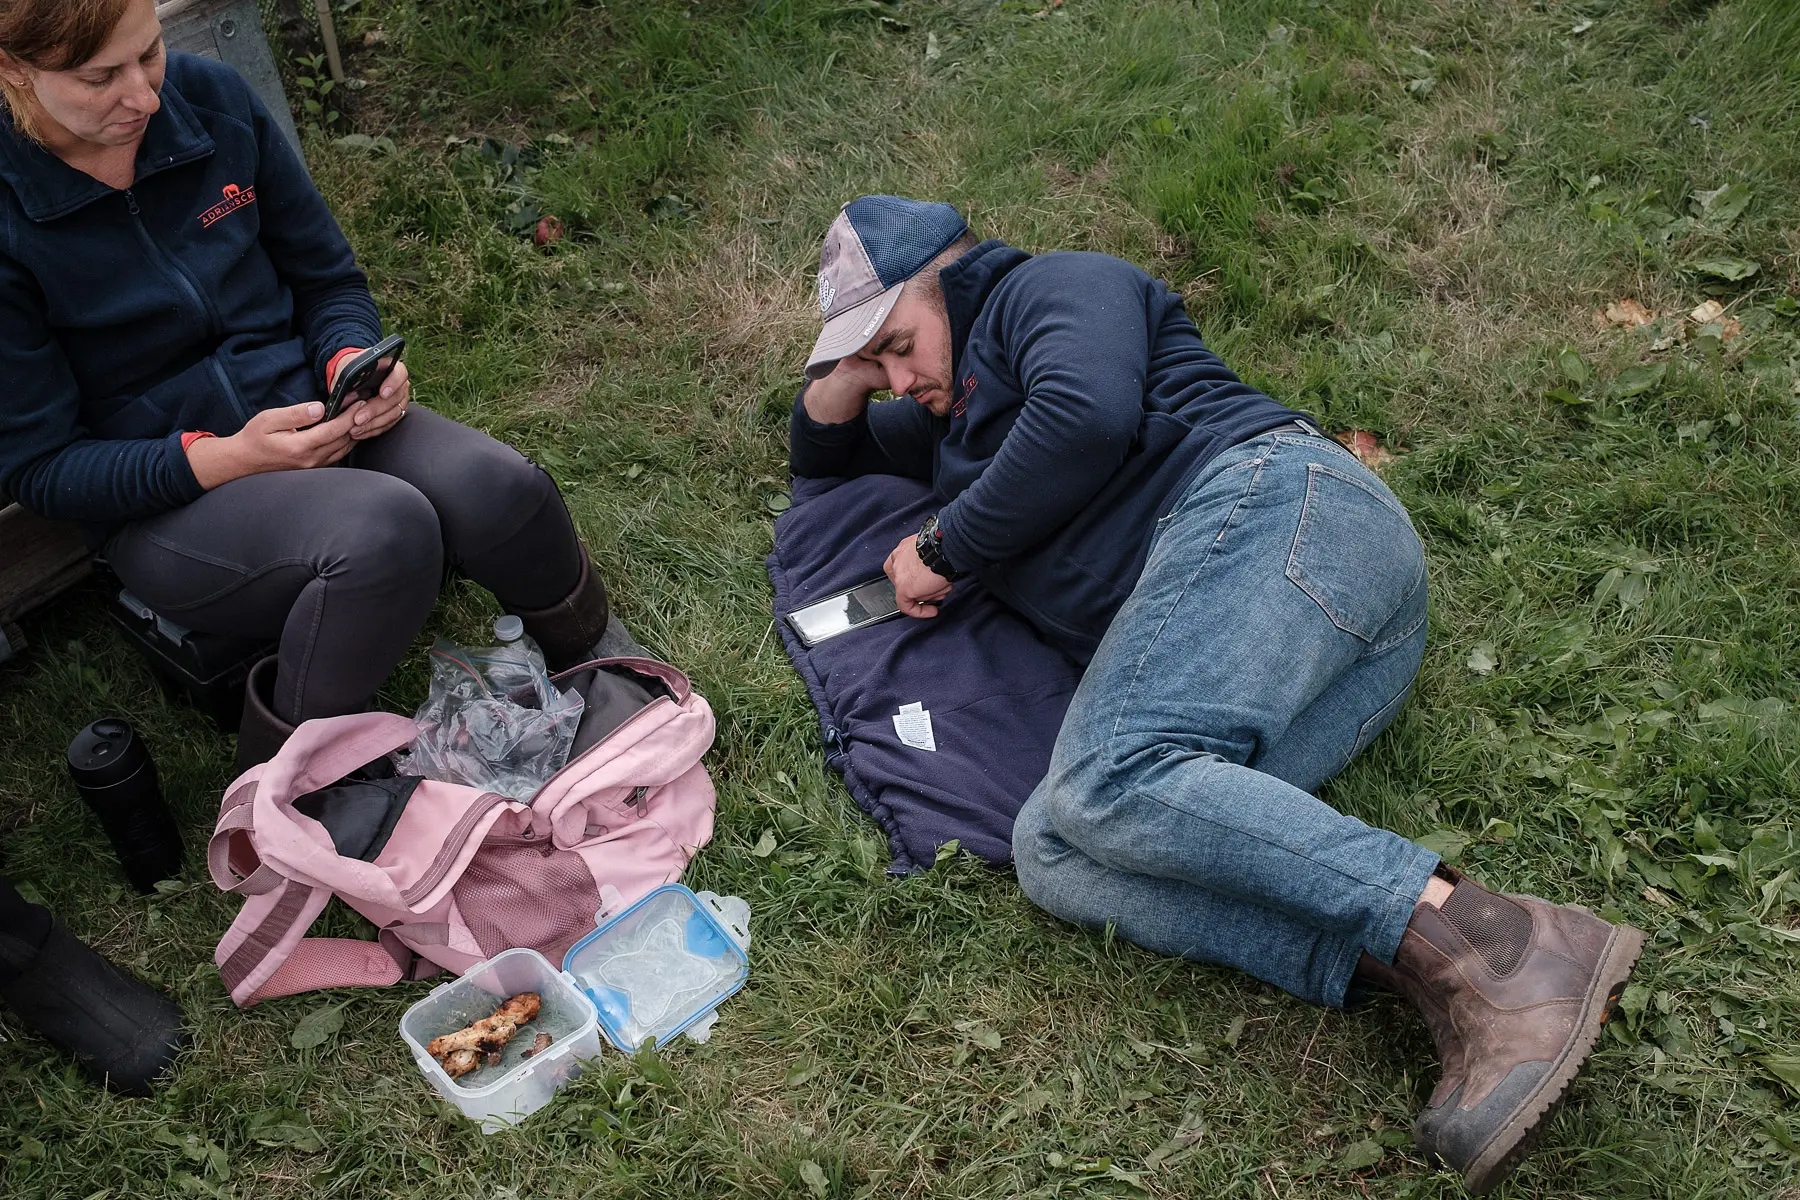 two farm workers rest in the grass with food, looking at their phones on their lunch break